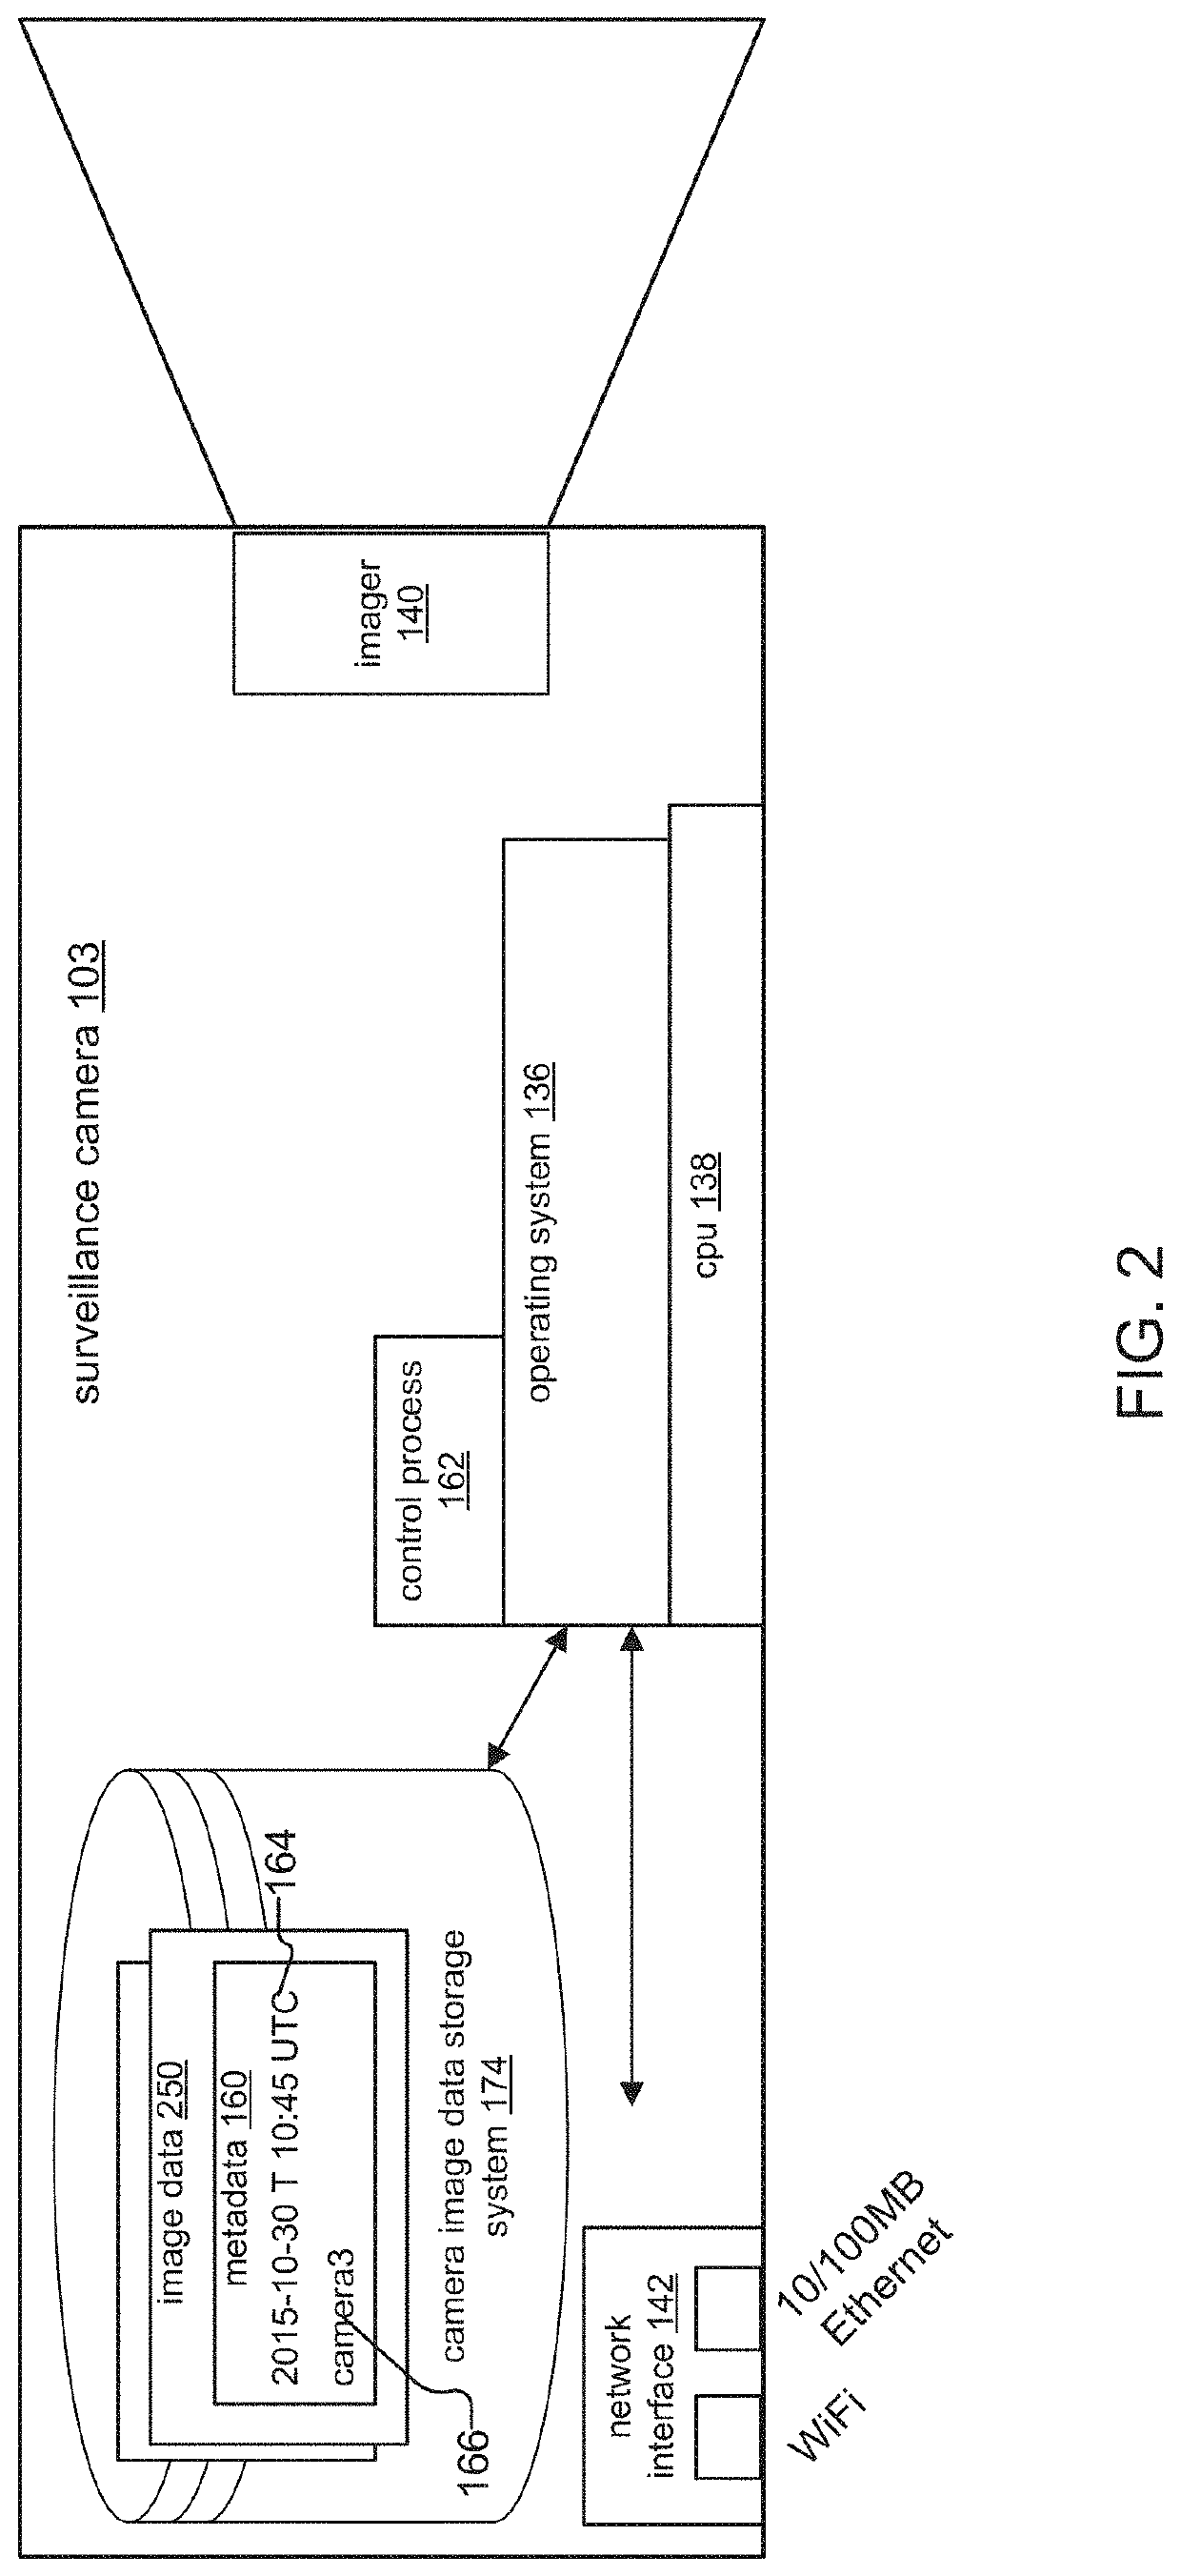 System and method for using mobile device of zone and correlated motion detection